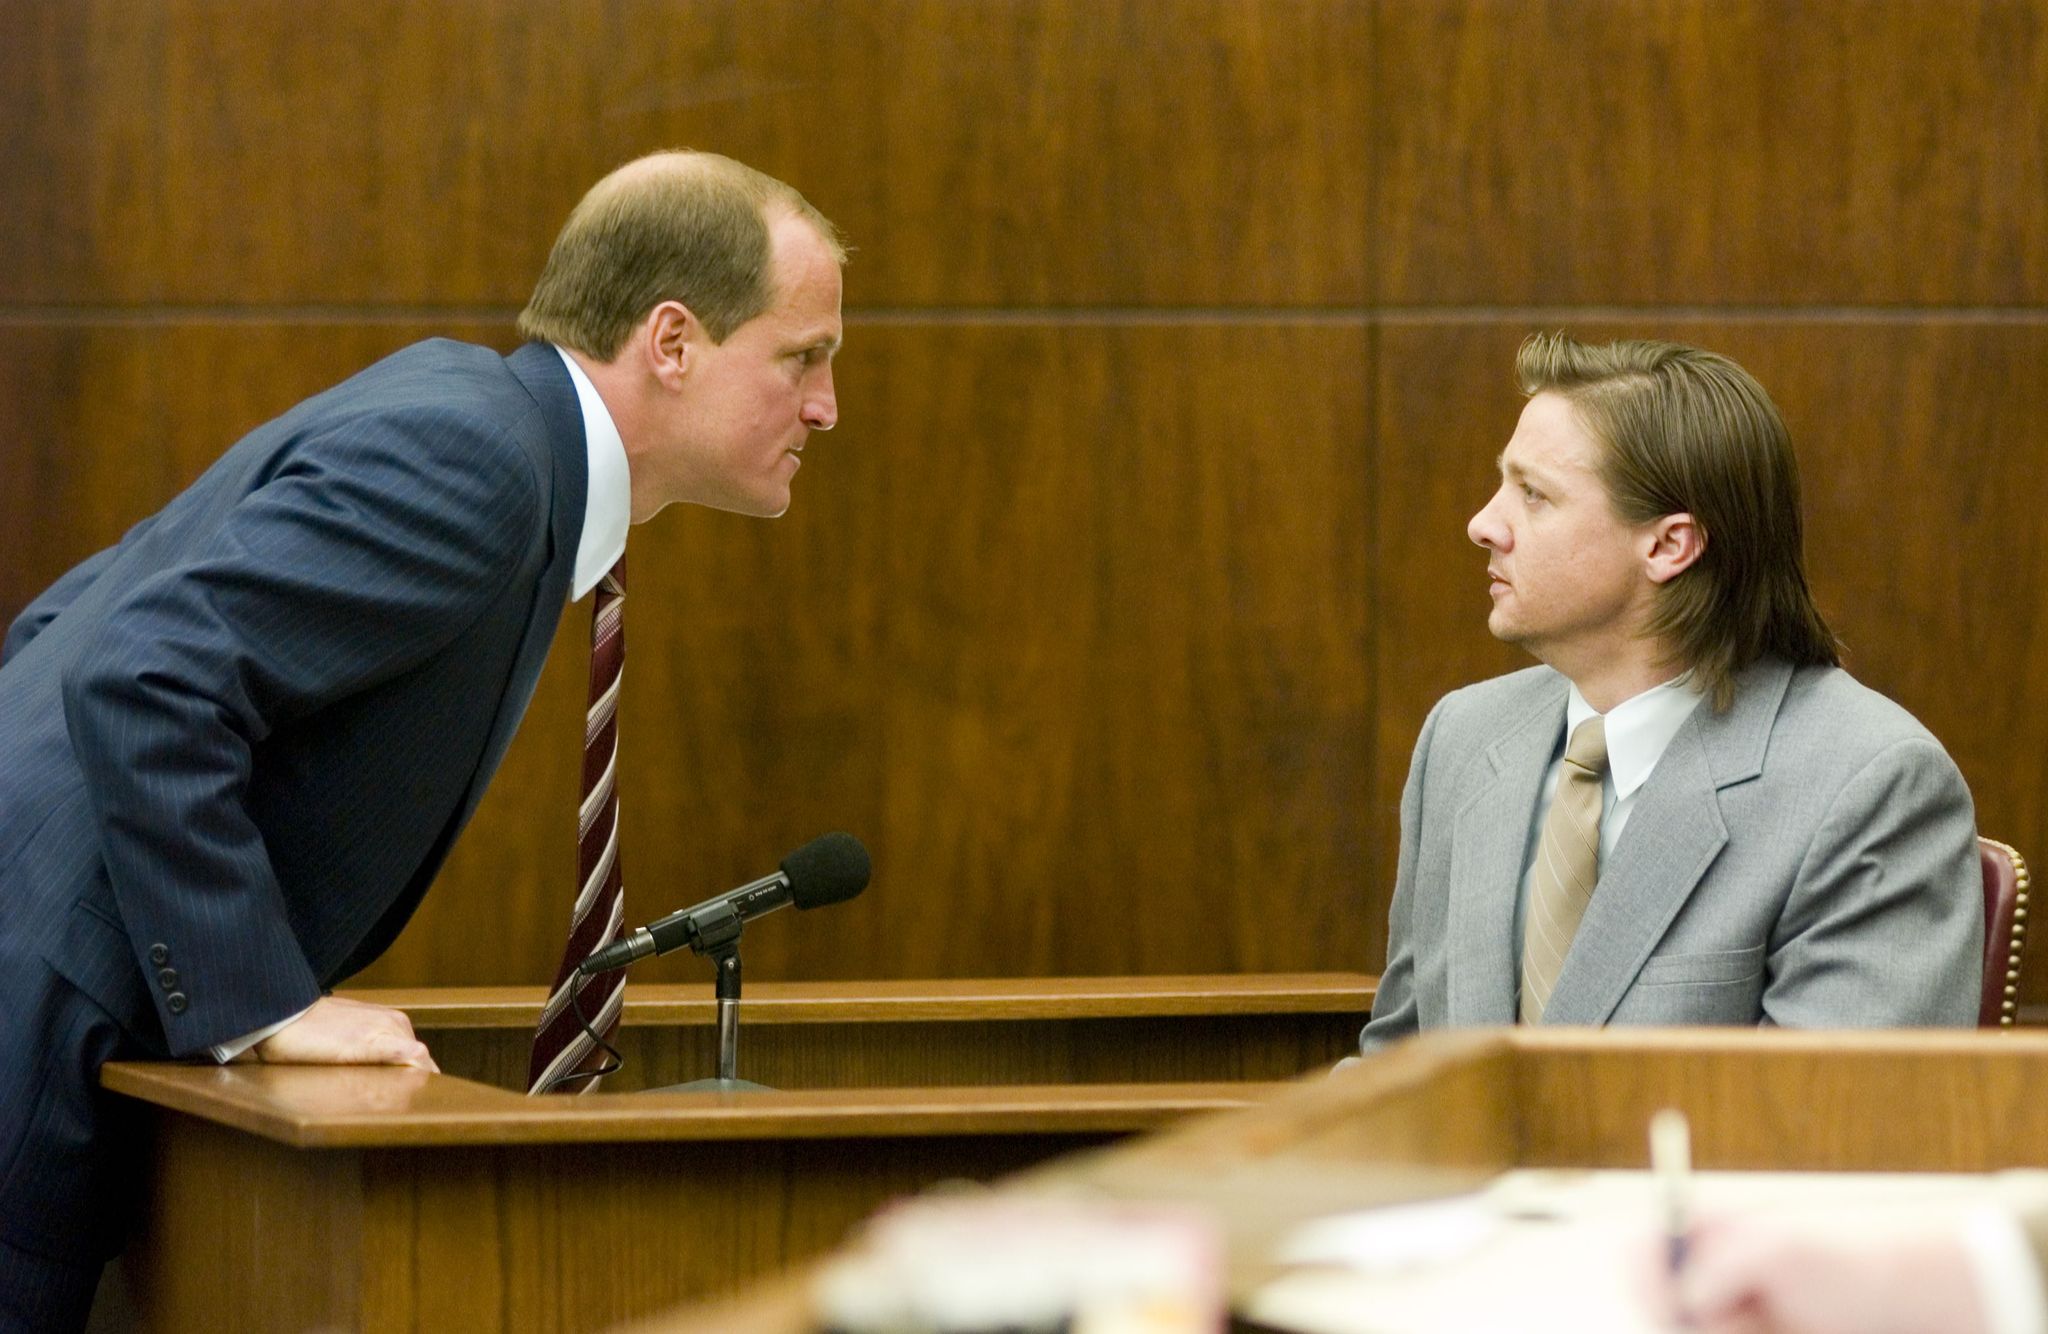 L-r: WOODY HARRELSON as Bill White and JEREMY RENNER as Bobby Sharp in North Country. 